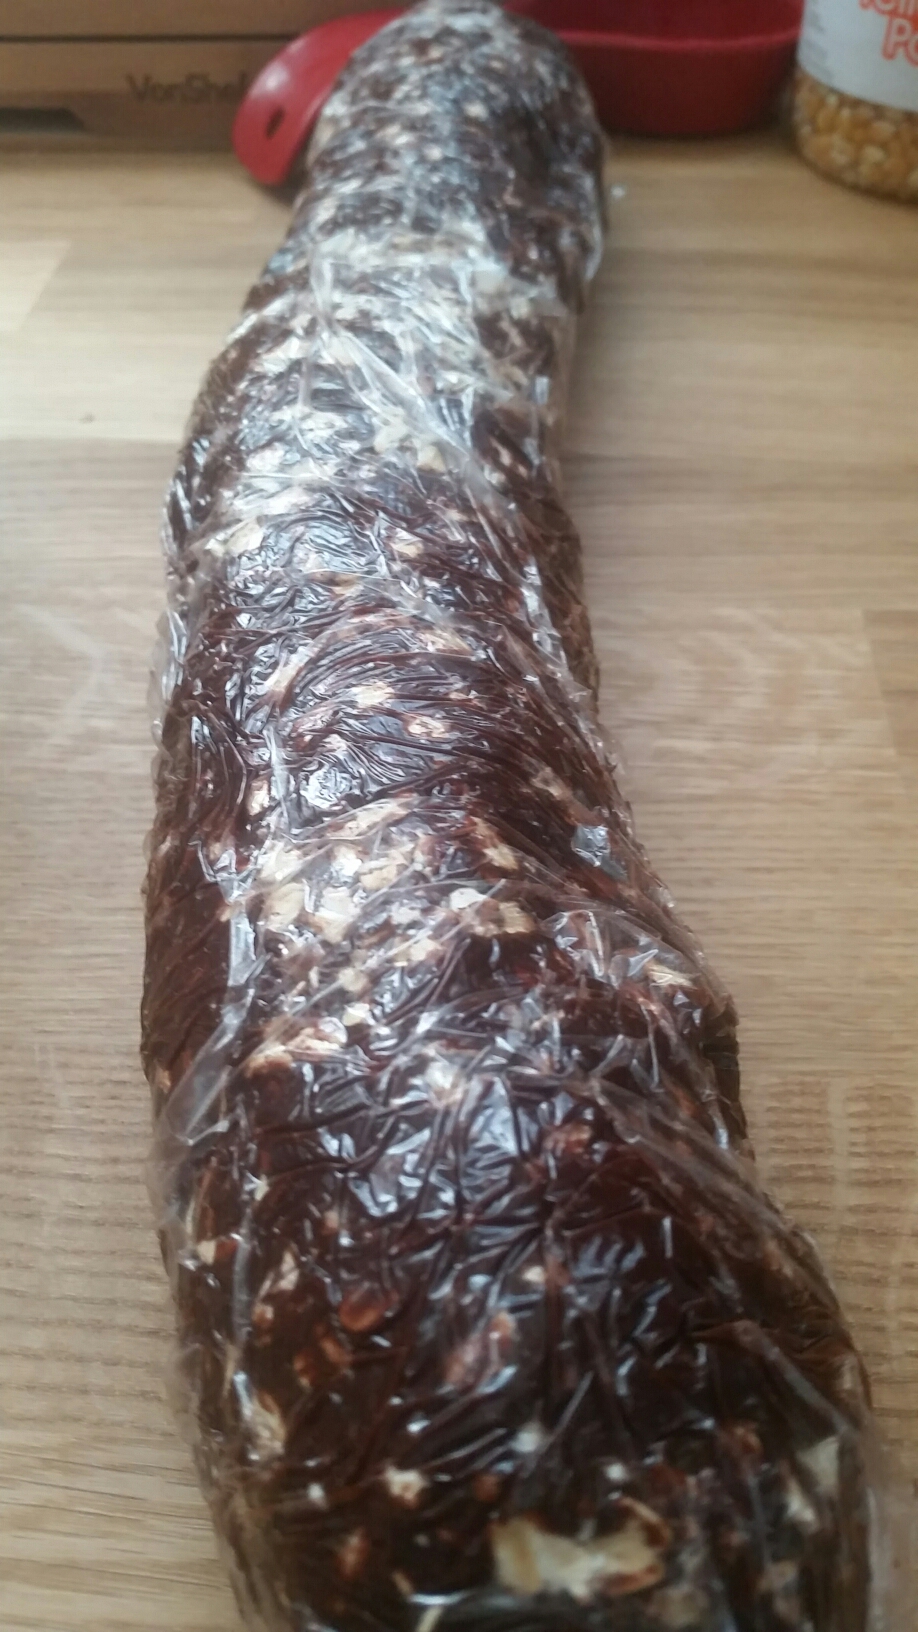 A cling wrapped log of brown cookie dough with flecks of white embedded in it.